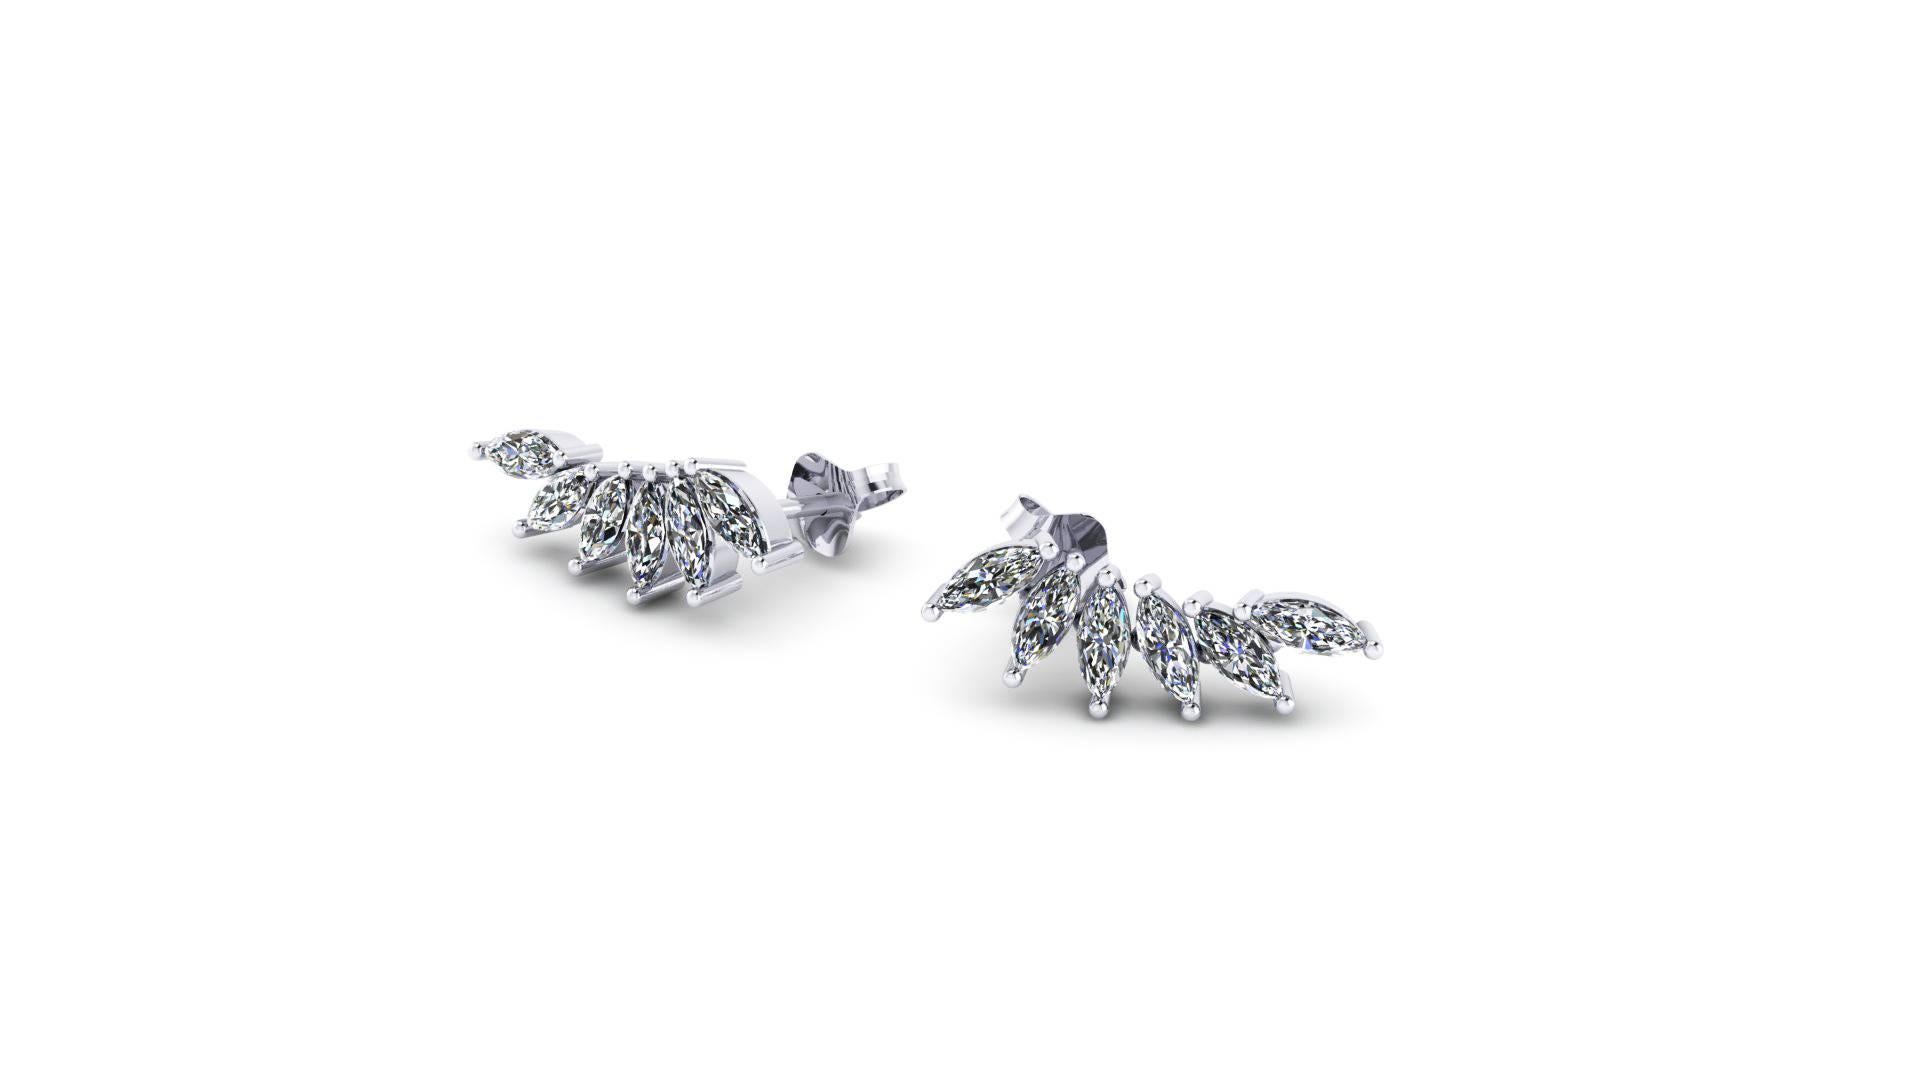 FERRUCCI 1.21 carats Marquise shape Diamonds wing earrings made in Platinum in New York City by Italian master jeweler, modern fashion look for every sophisticated woman of every age, pret-a-porter, easy to wear from office to evening out.